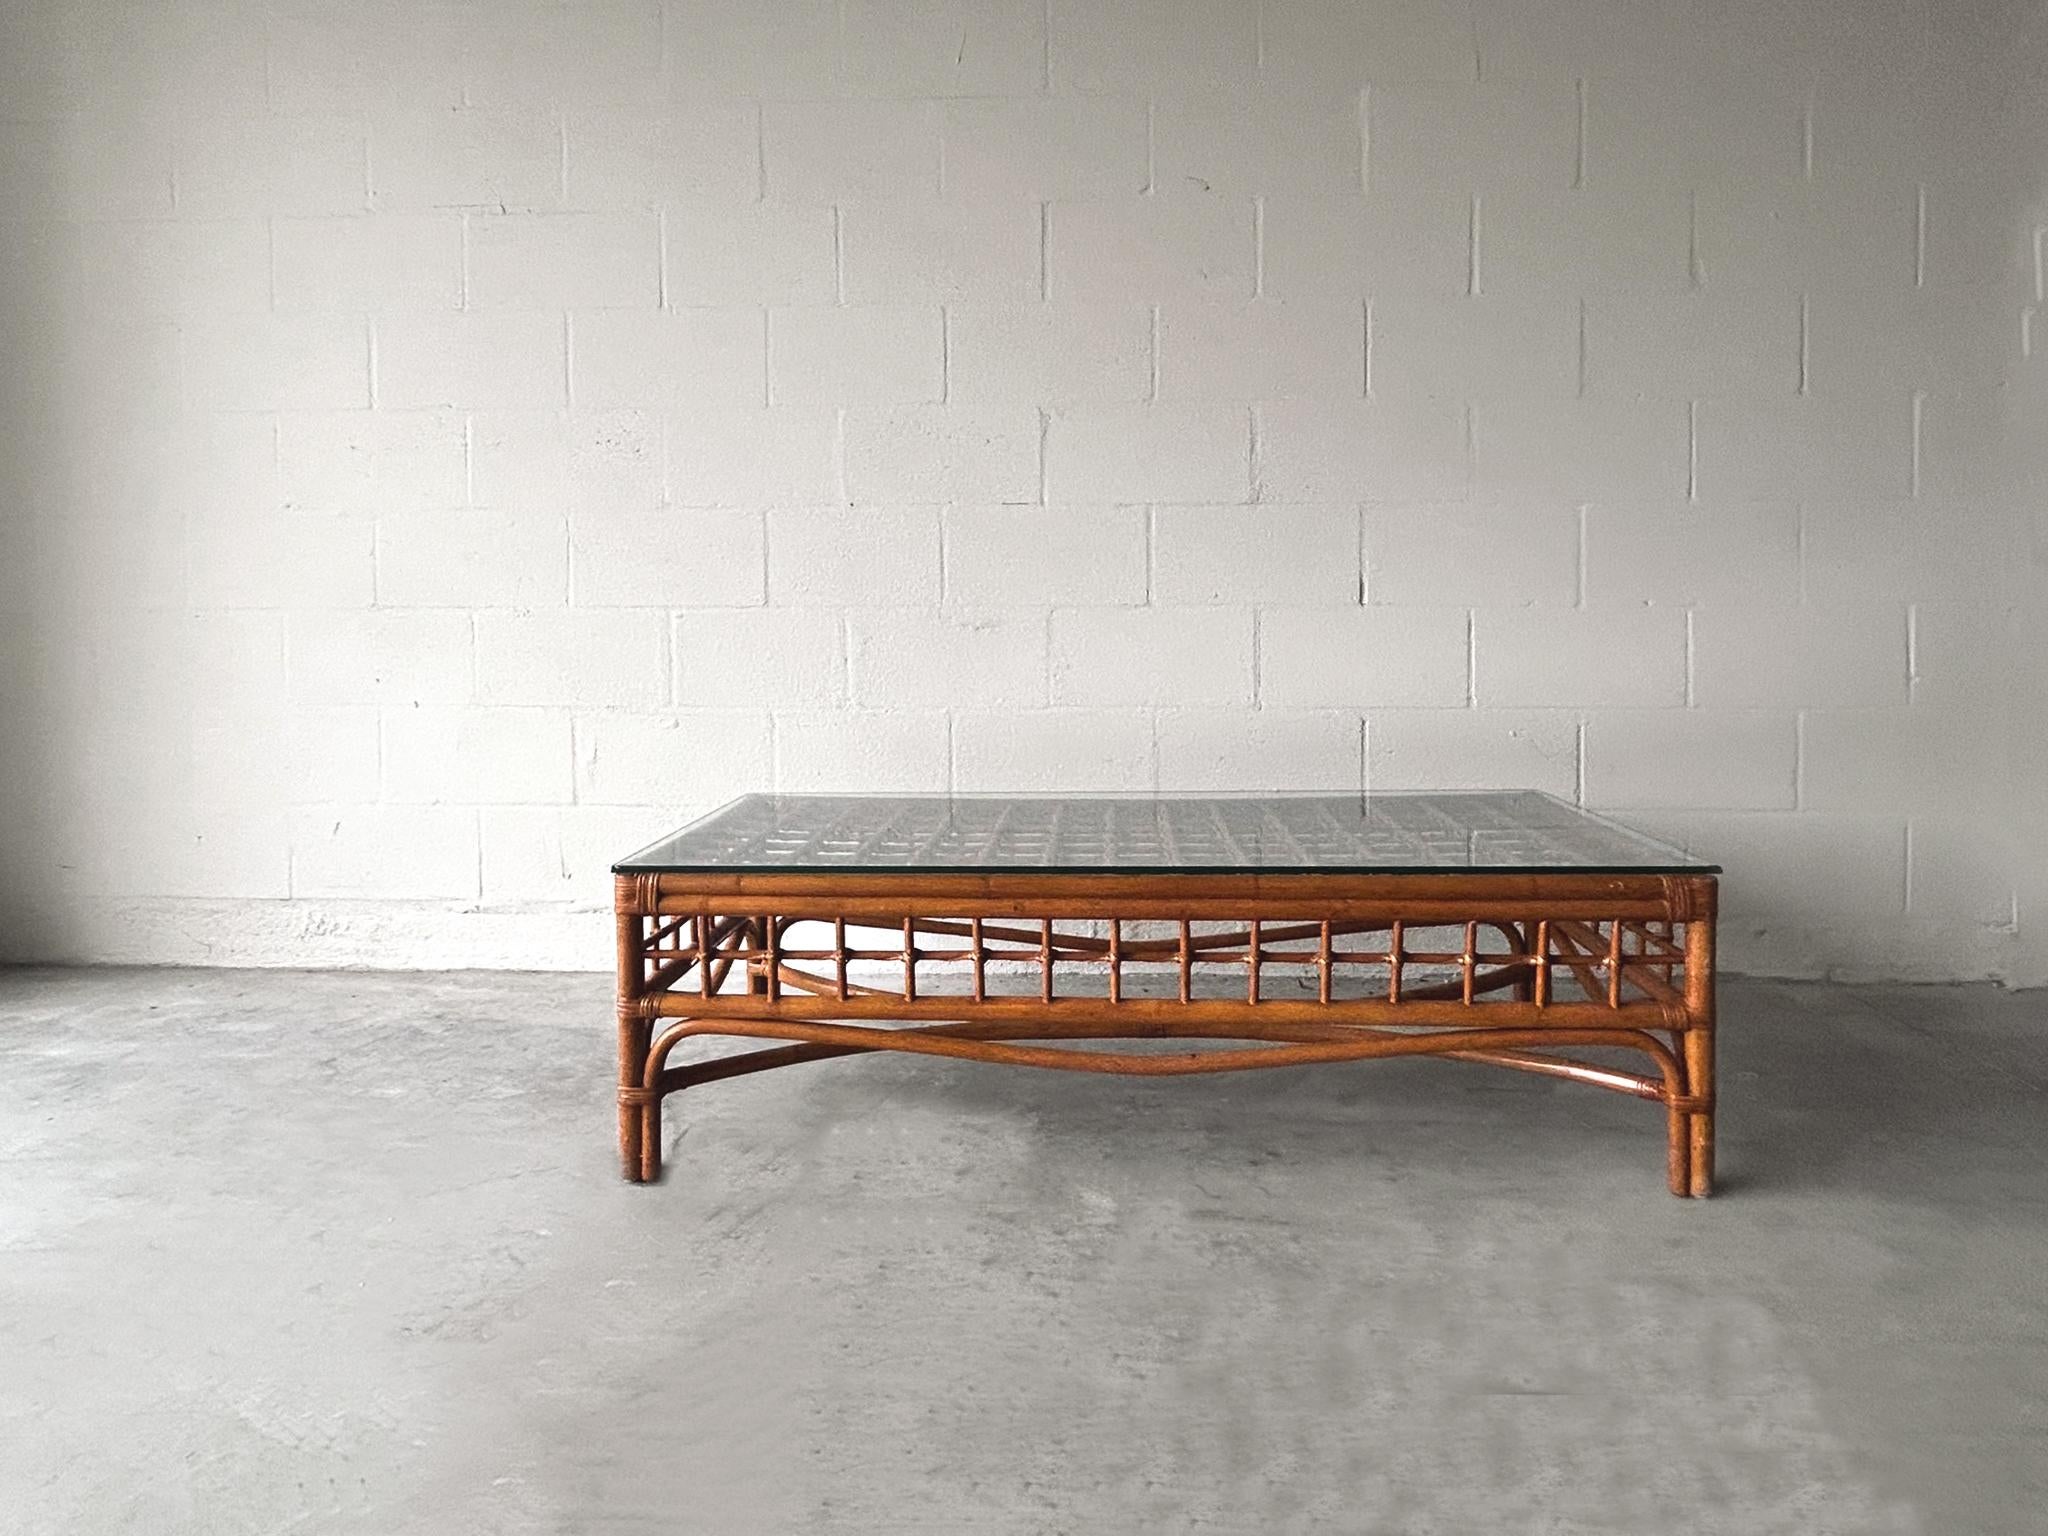 Woven bamboo coffee table. Low profile with glass top. Table's aesthetic mirrors that of Franco Albini. In good vintage condition. Dimensions; Height 16.5